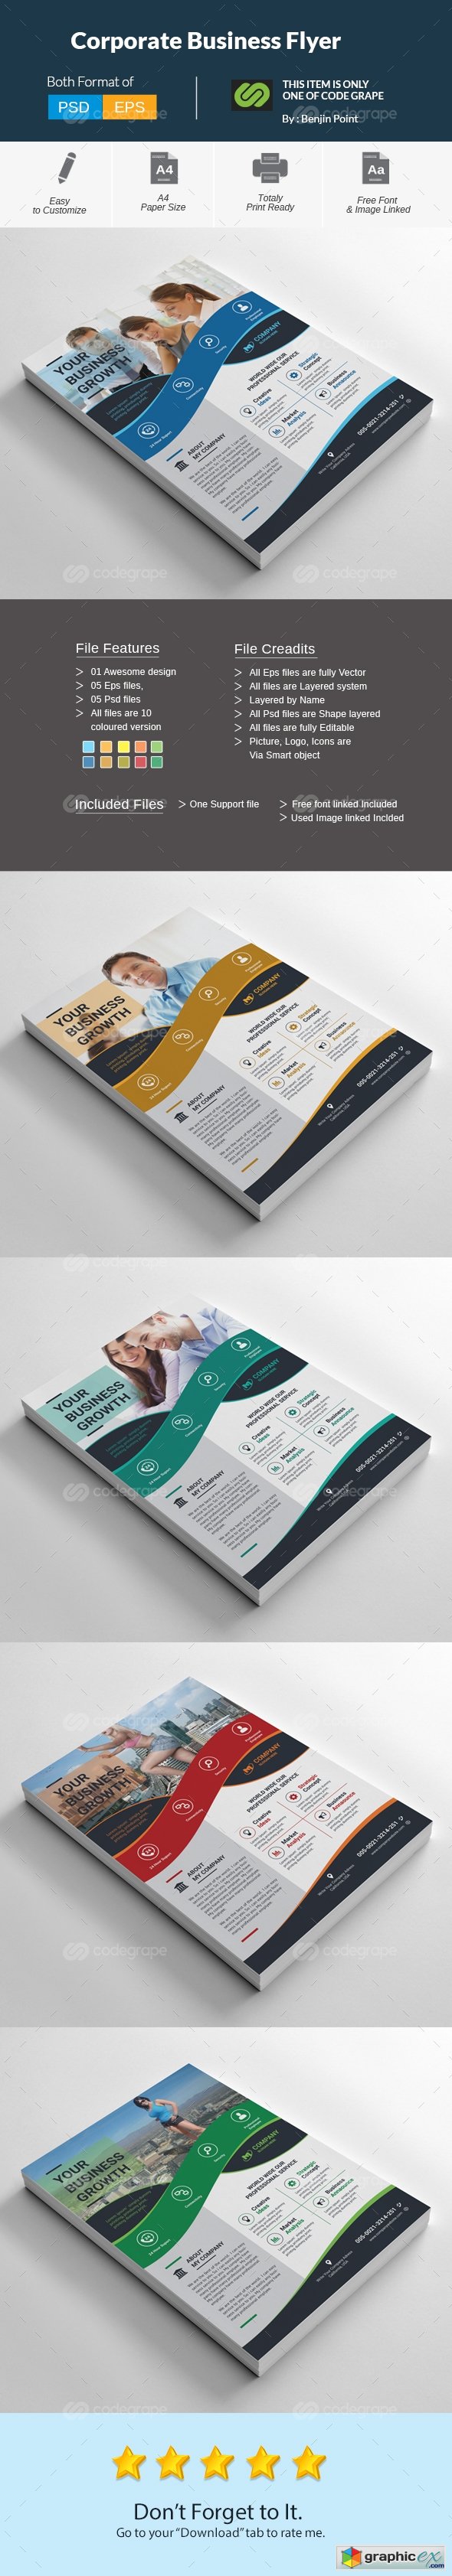 Corporate Business Flyer 9078